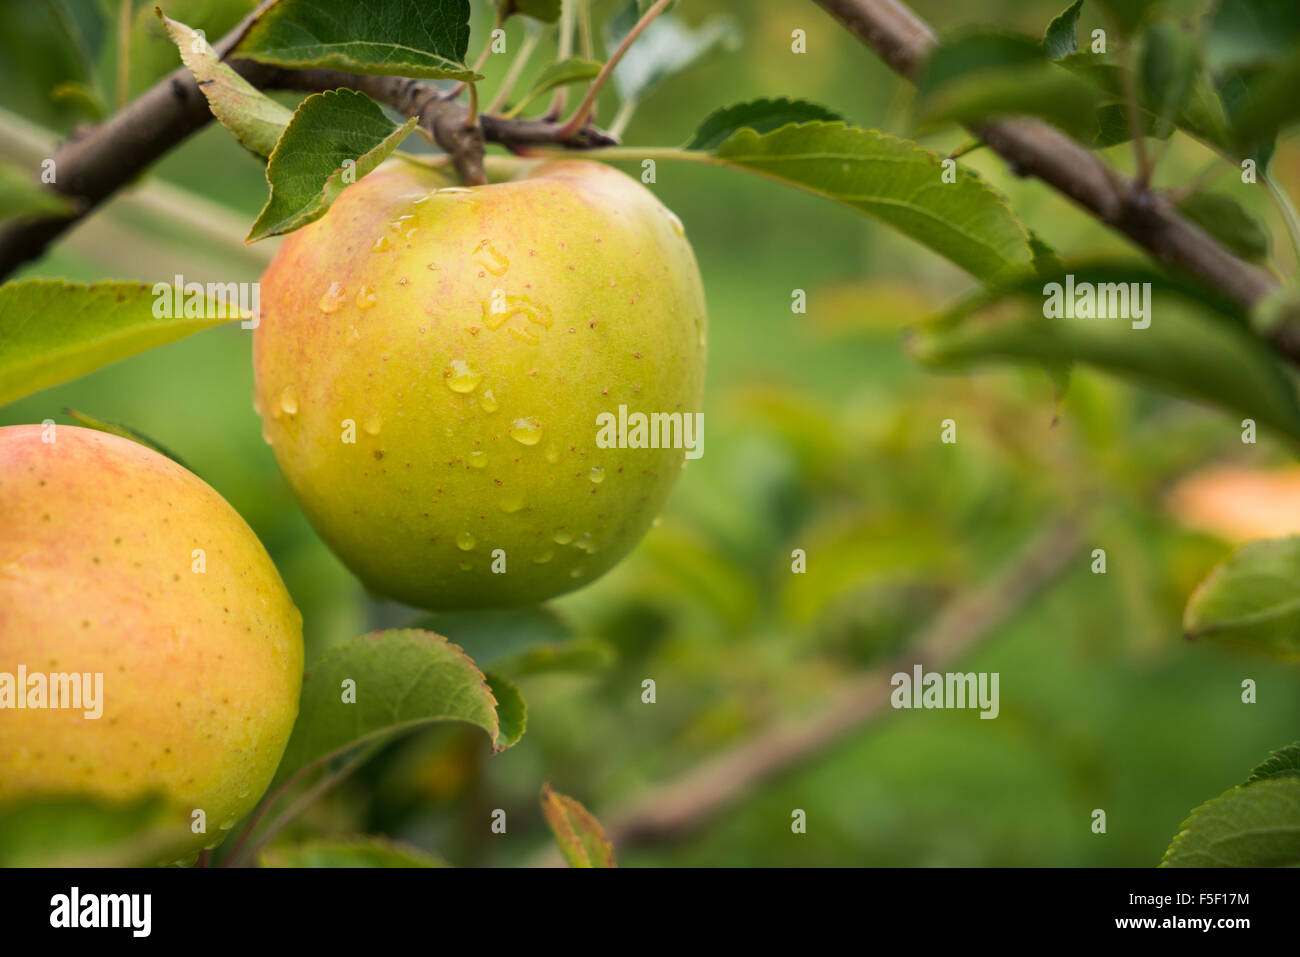 Rain drops clinging to the side of an apple Stock Photo